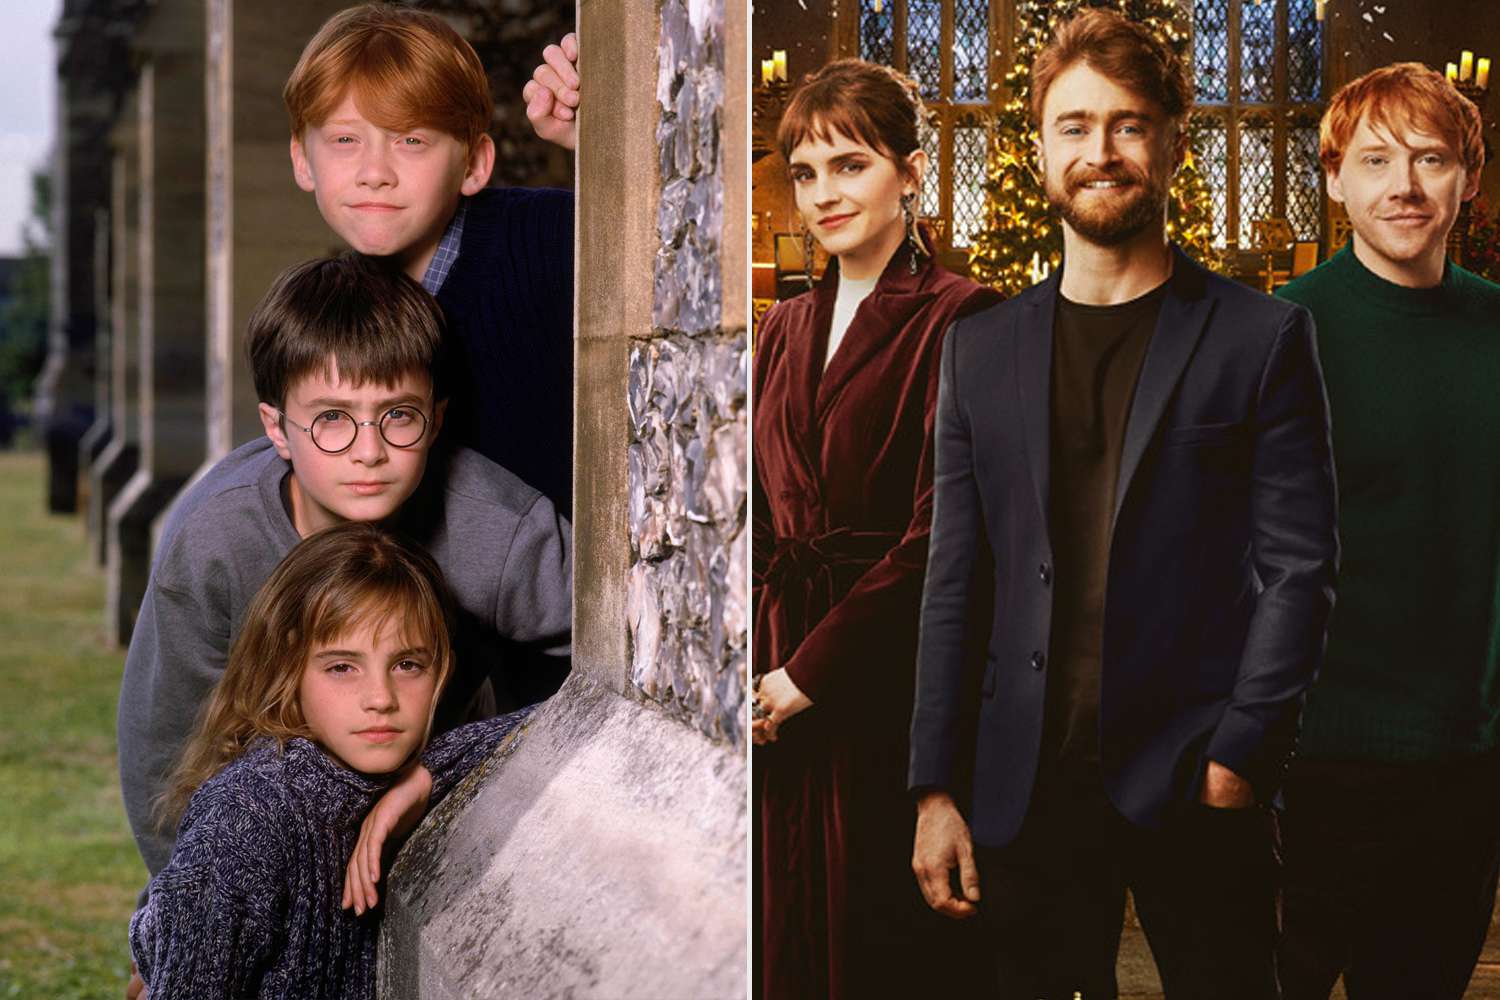 Who Are The Main Actors In The Harry Potter Cast?